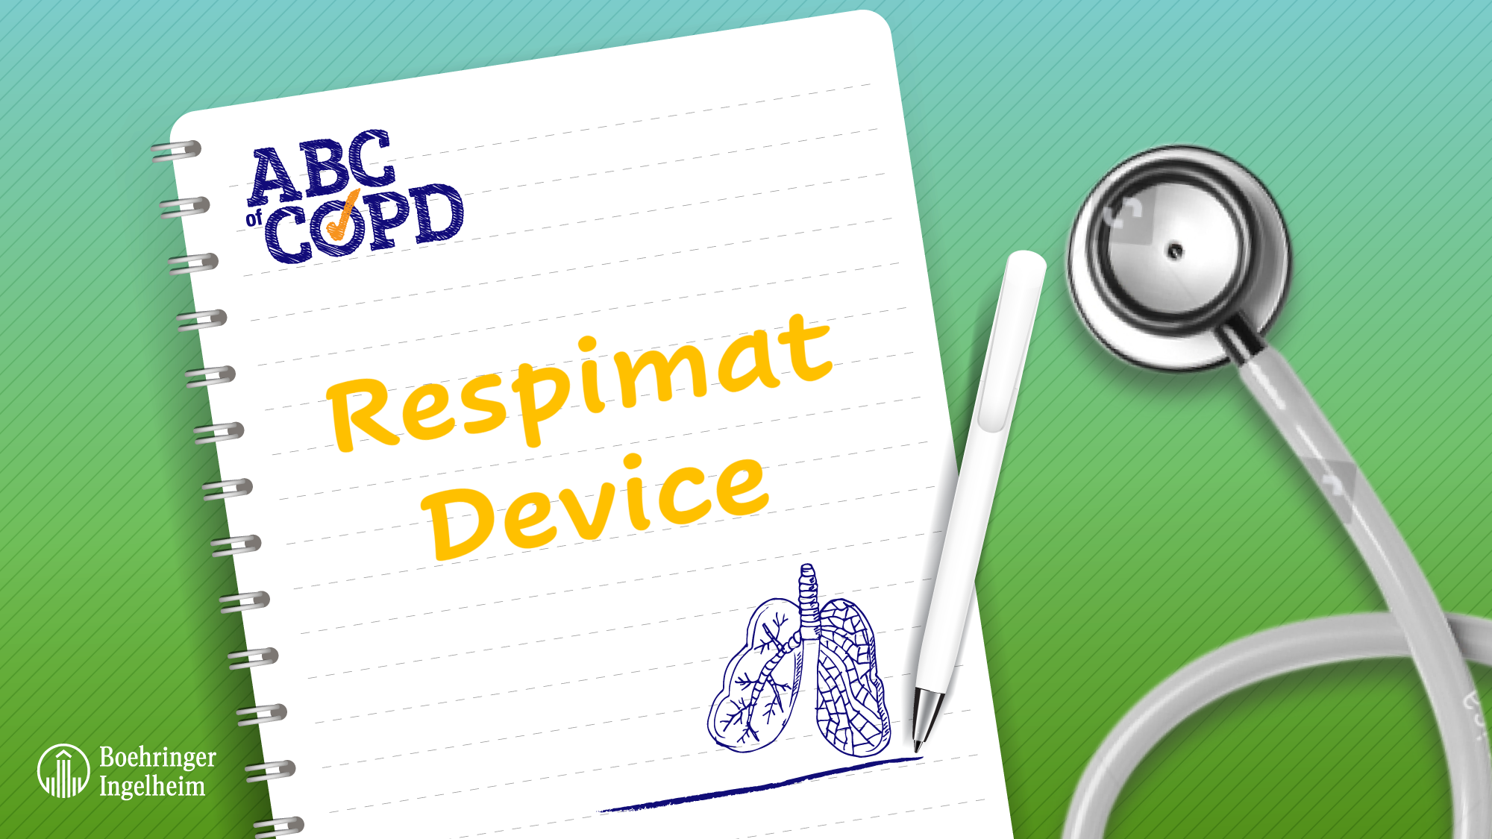 ABCs of COPD - Respimat Device